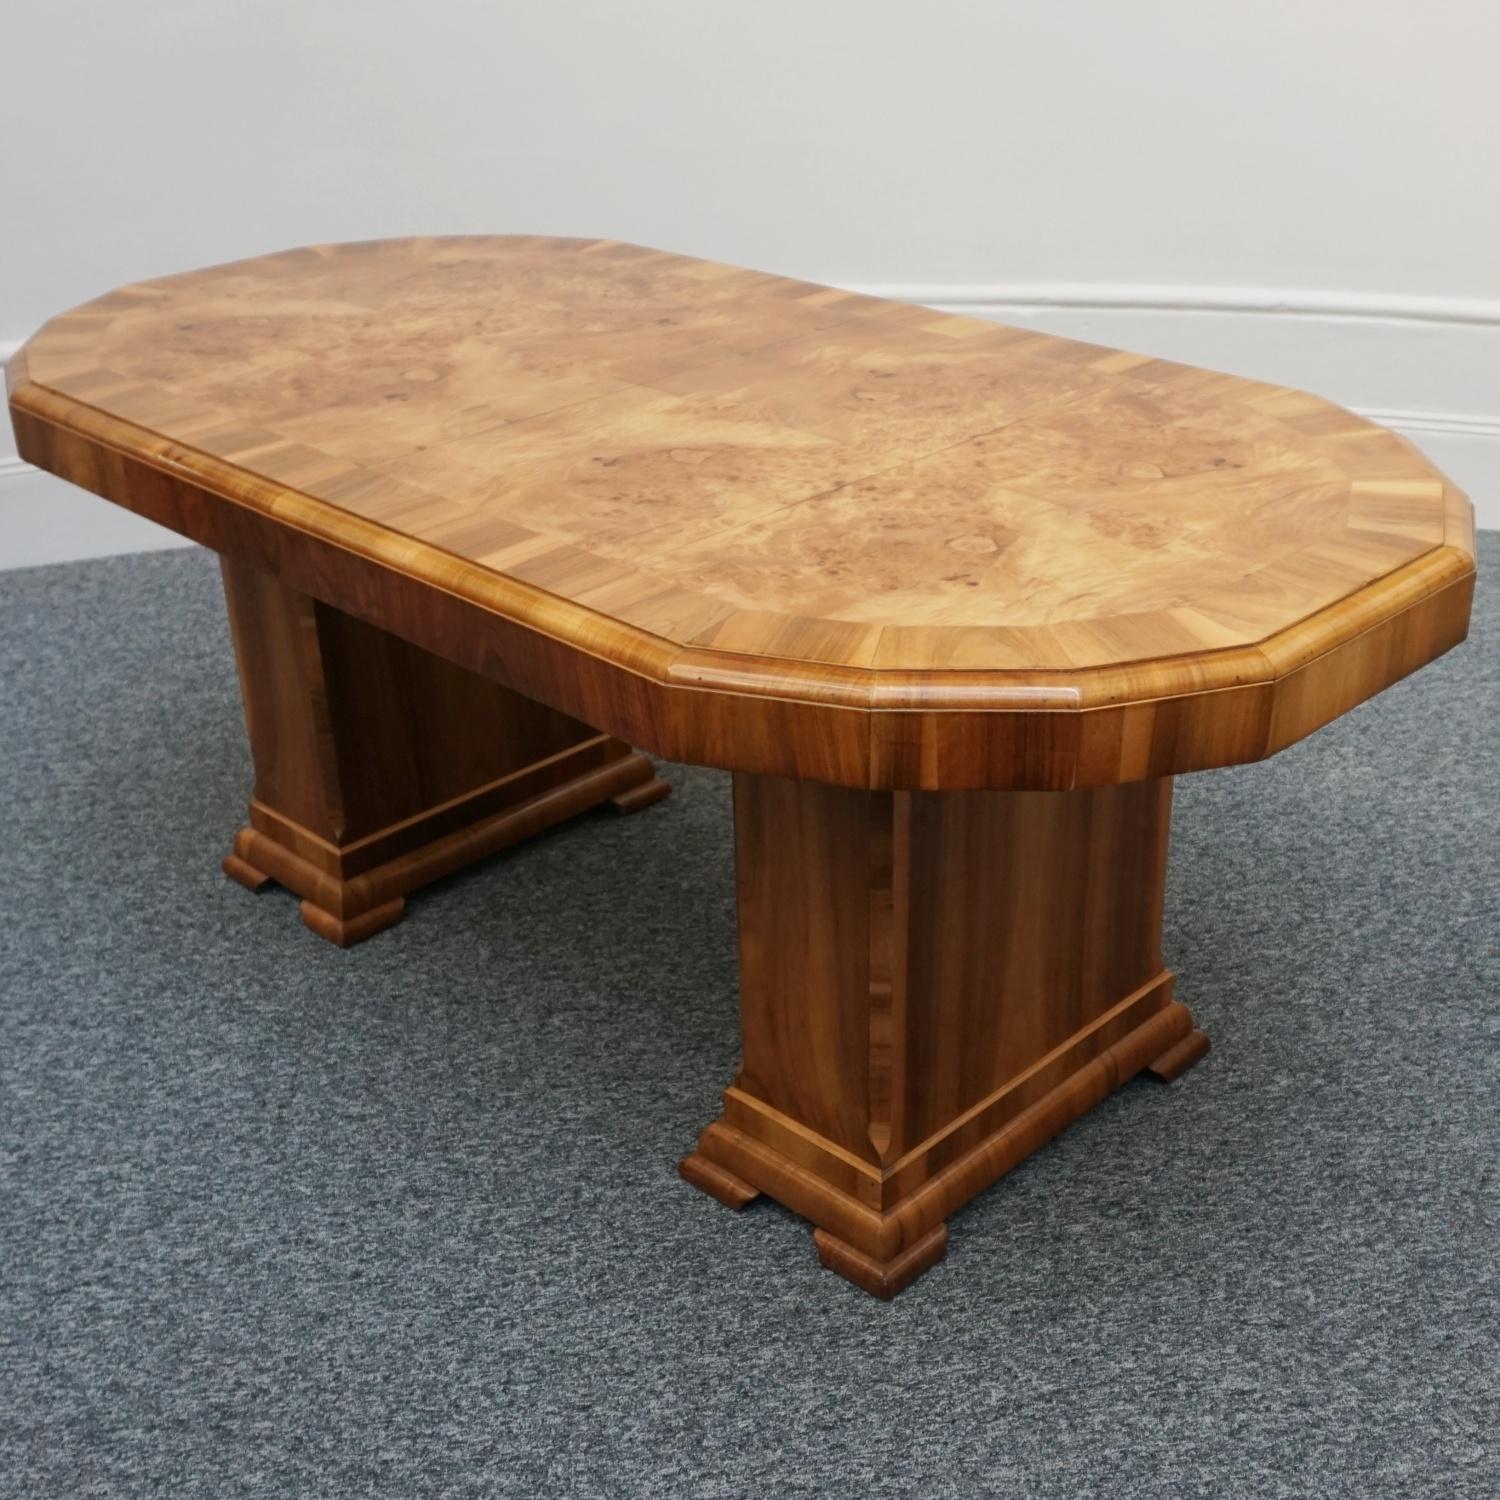 Original Burr and Figured Walnut Art Deco Dining Room Table, Circa 1930 In Good Condition For Sale In Forest Row, East Sussex